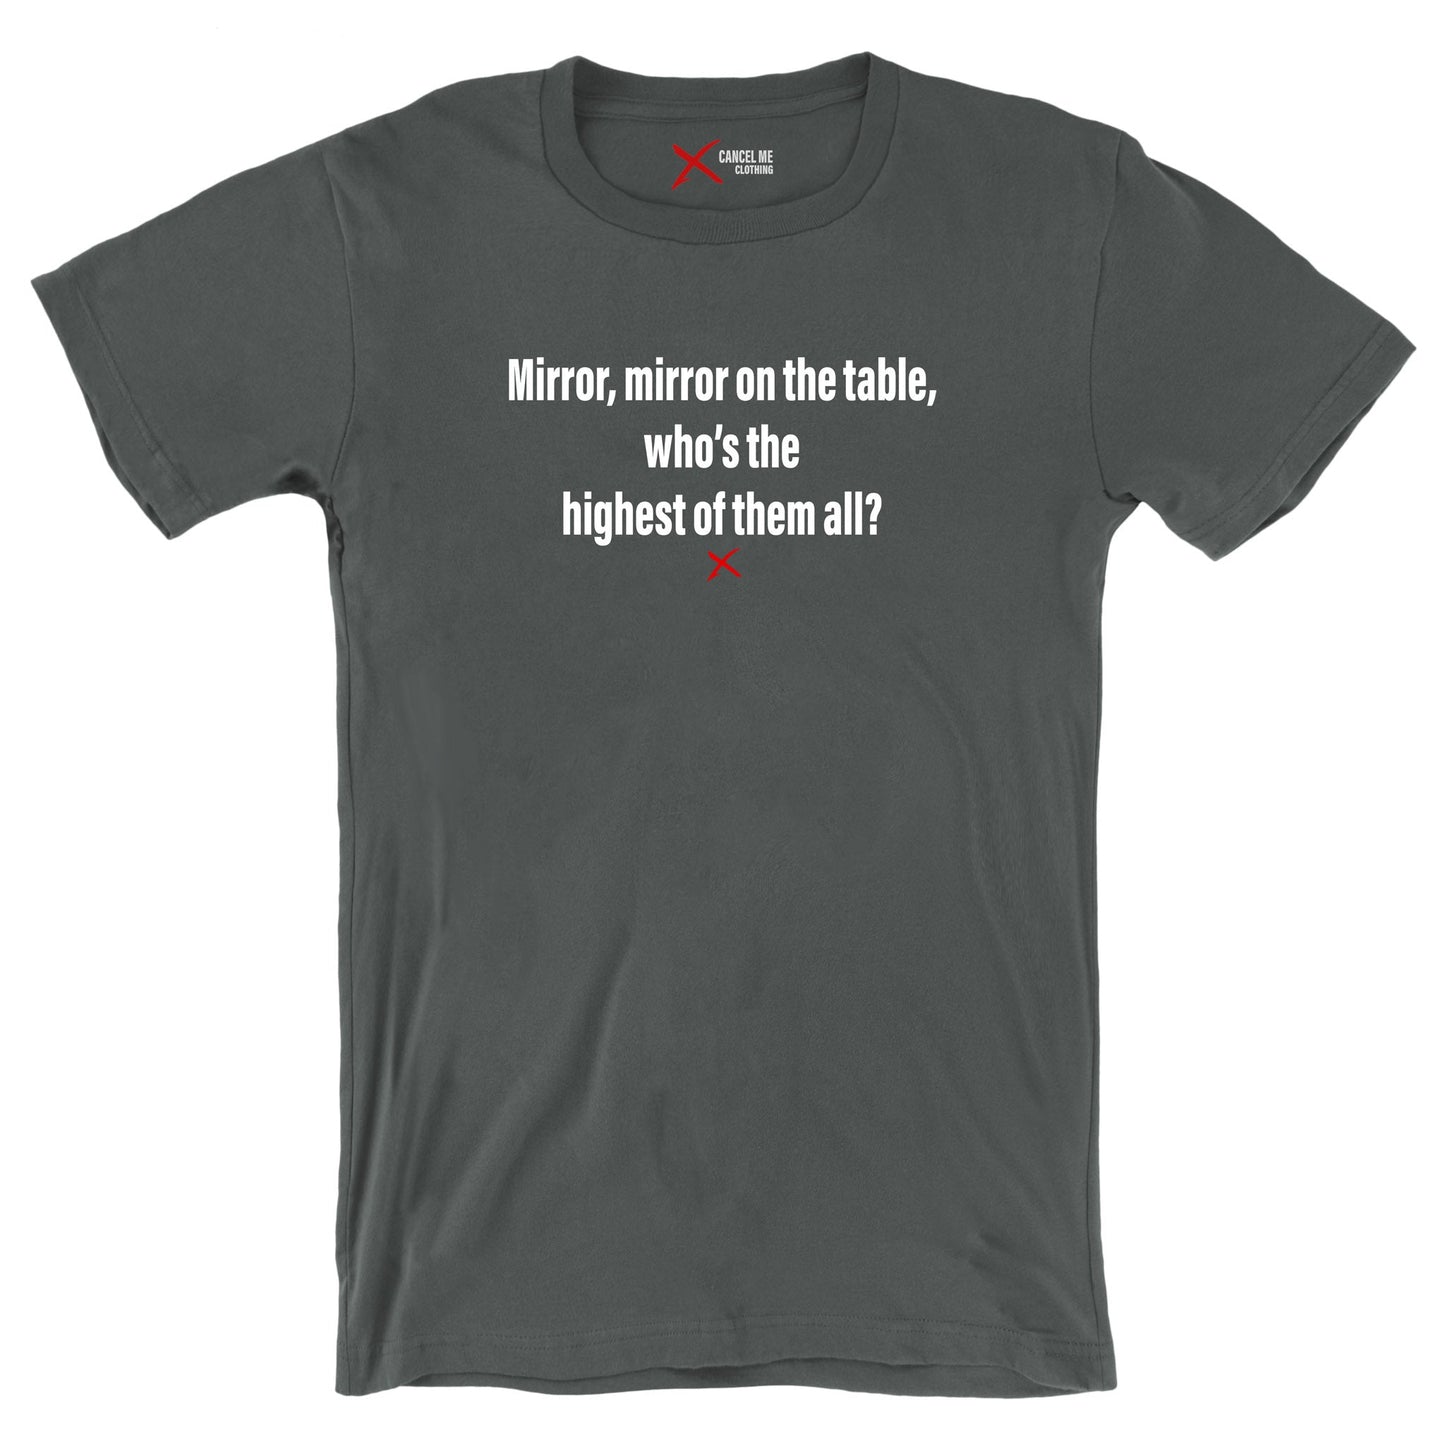 Mirror, mirror on the table, who's the highest of them all? - Shirt